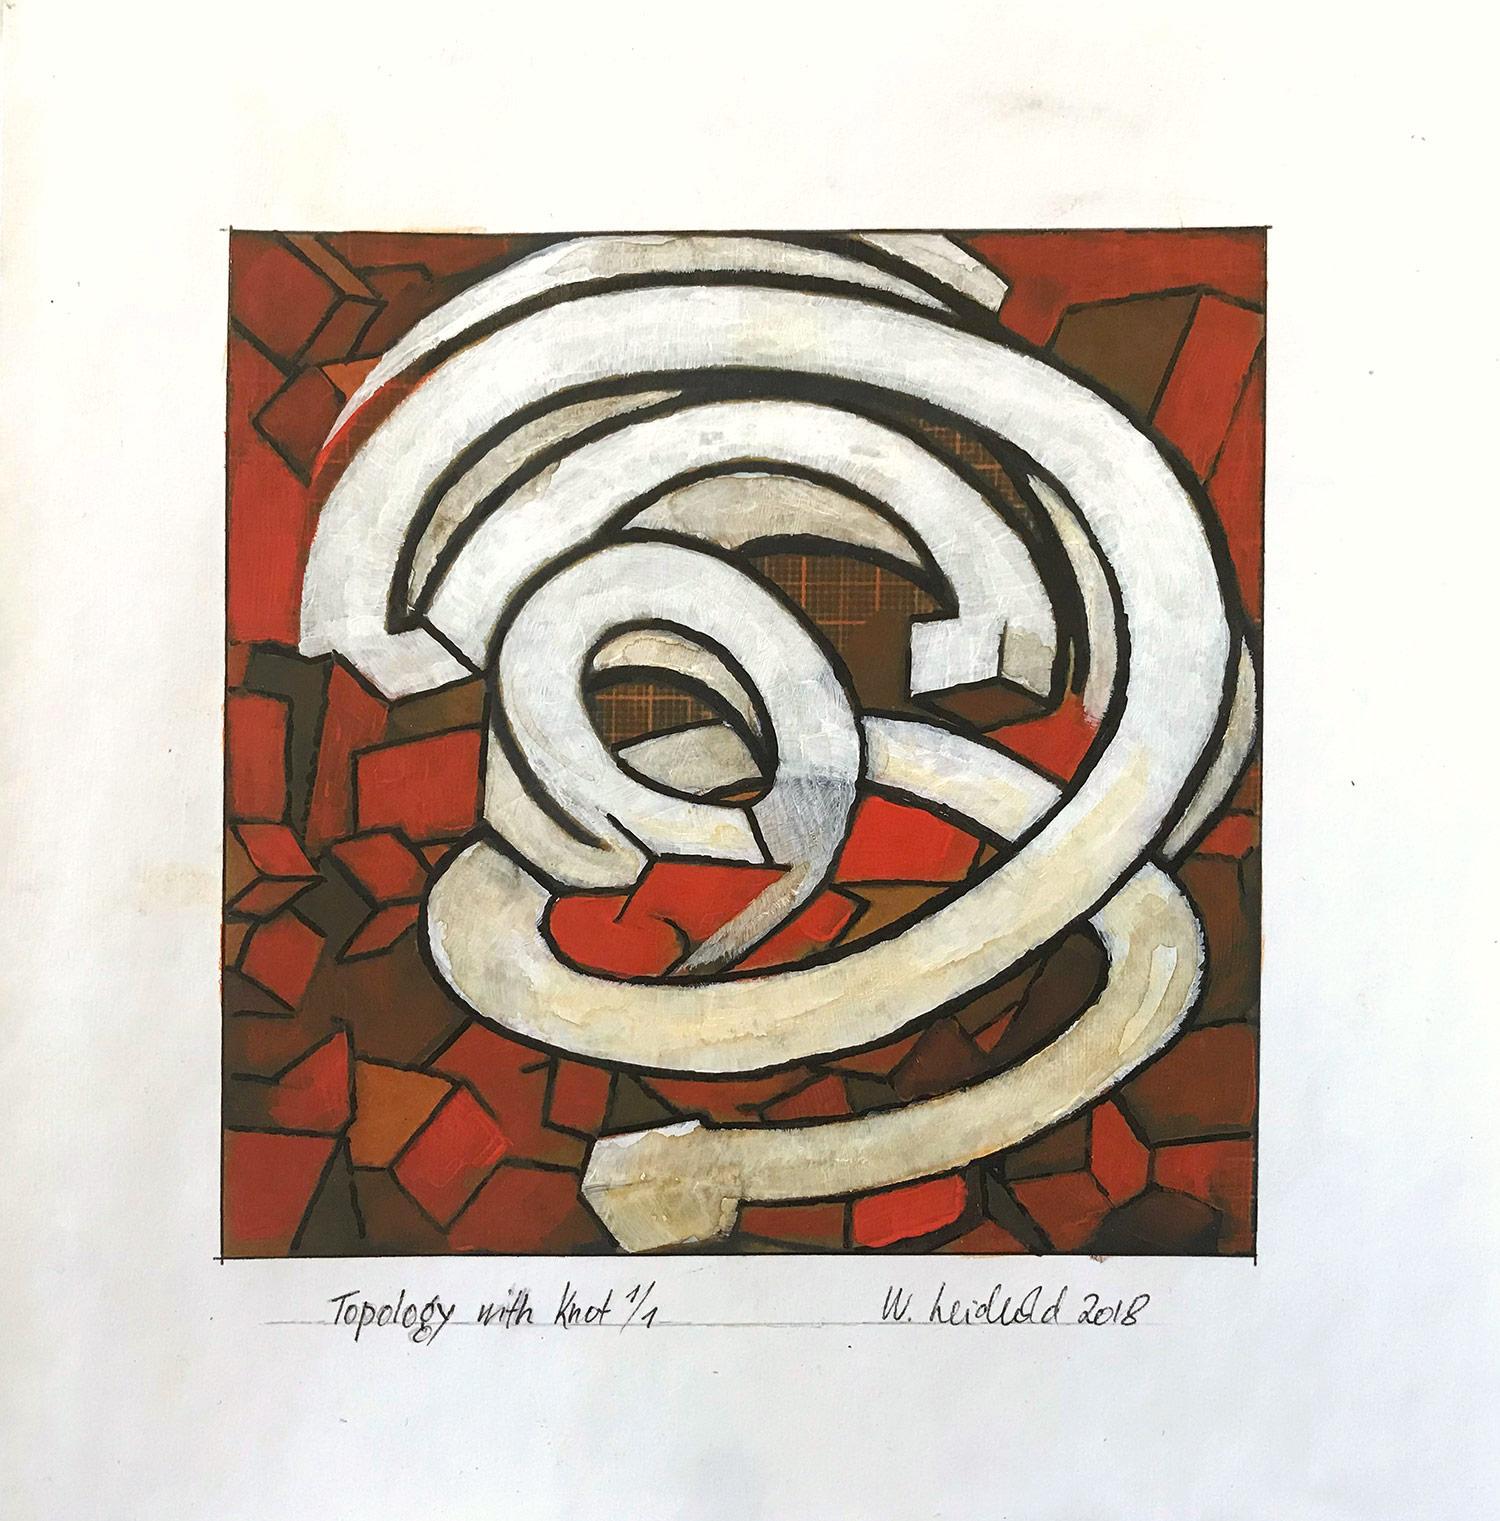 Wolfgang Leidhold Figurative Painting - "Topology with Knot 1/1" Abstract Representational Knot Painting Work on Paper